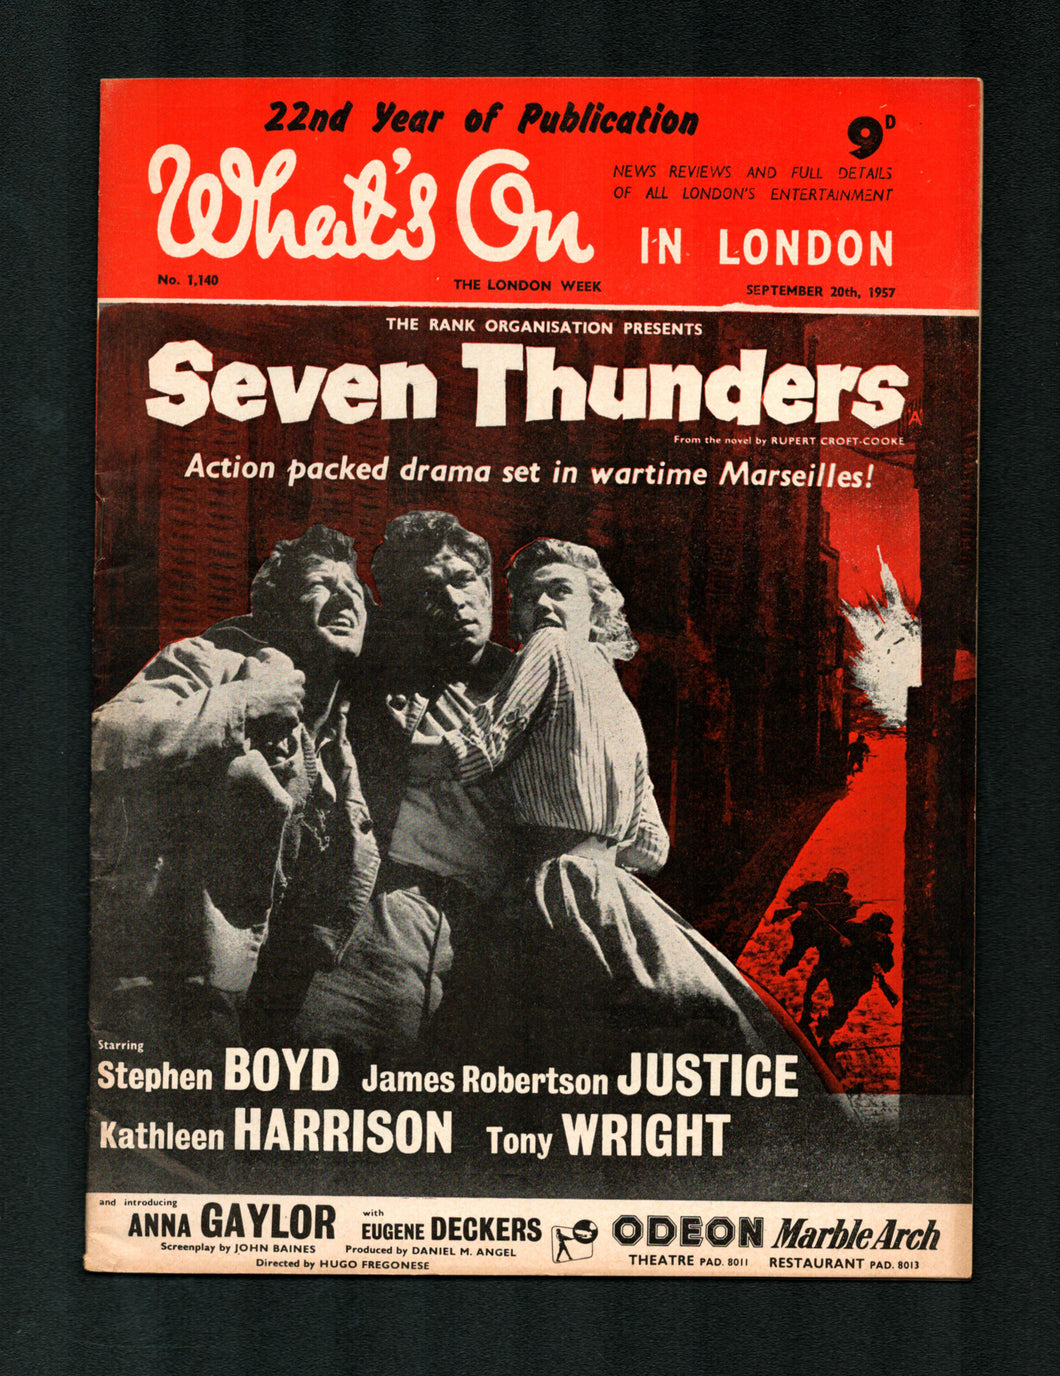 Whats on in London No 1140 Sept 20 1957